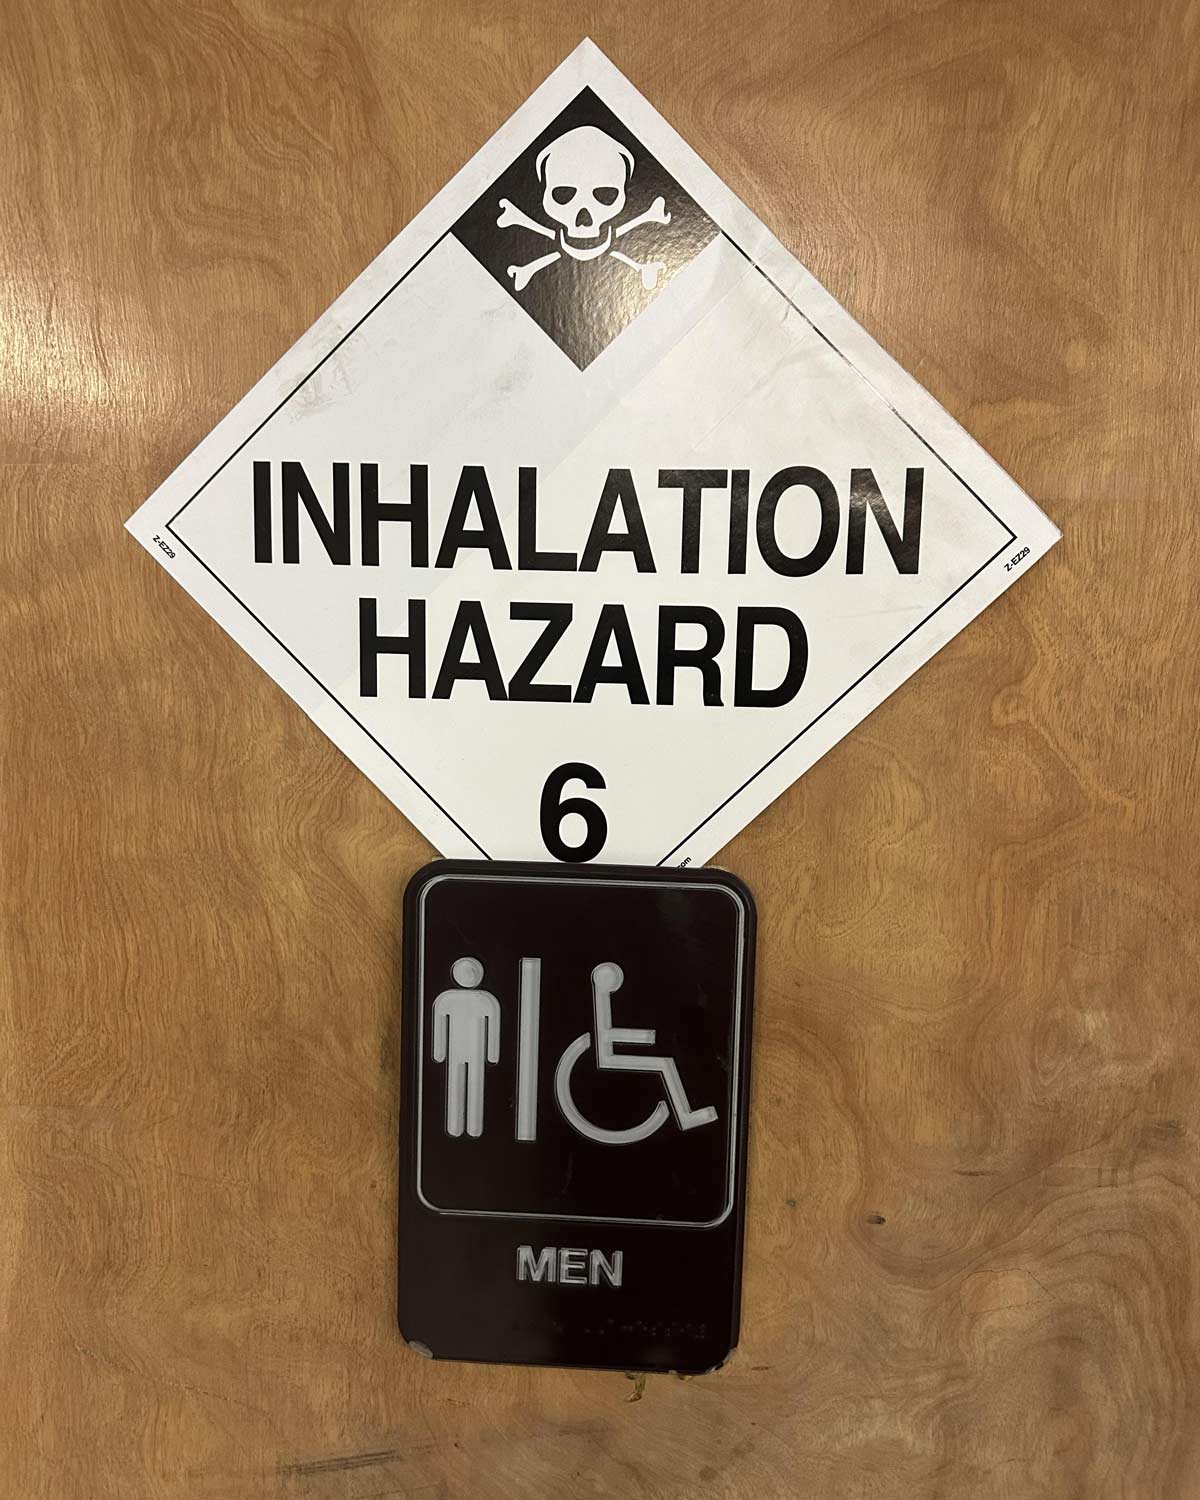 I work for an environmental company, someone added extra labeling to our bathrooms